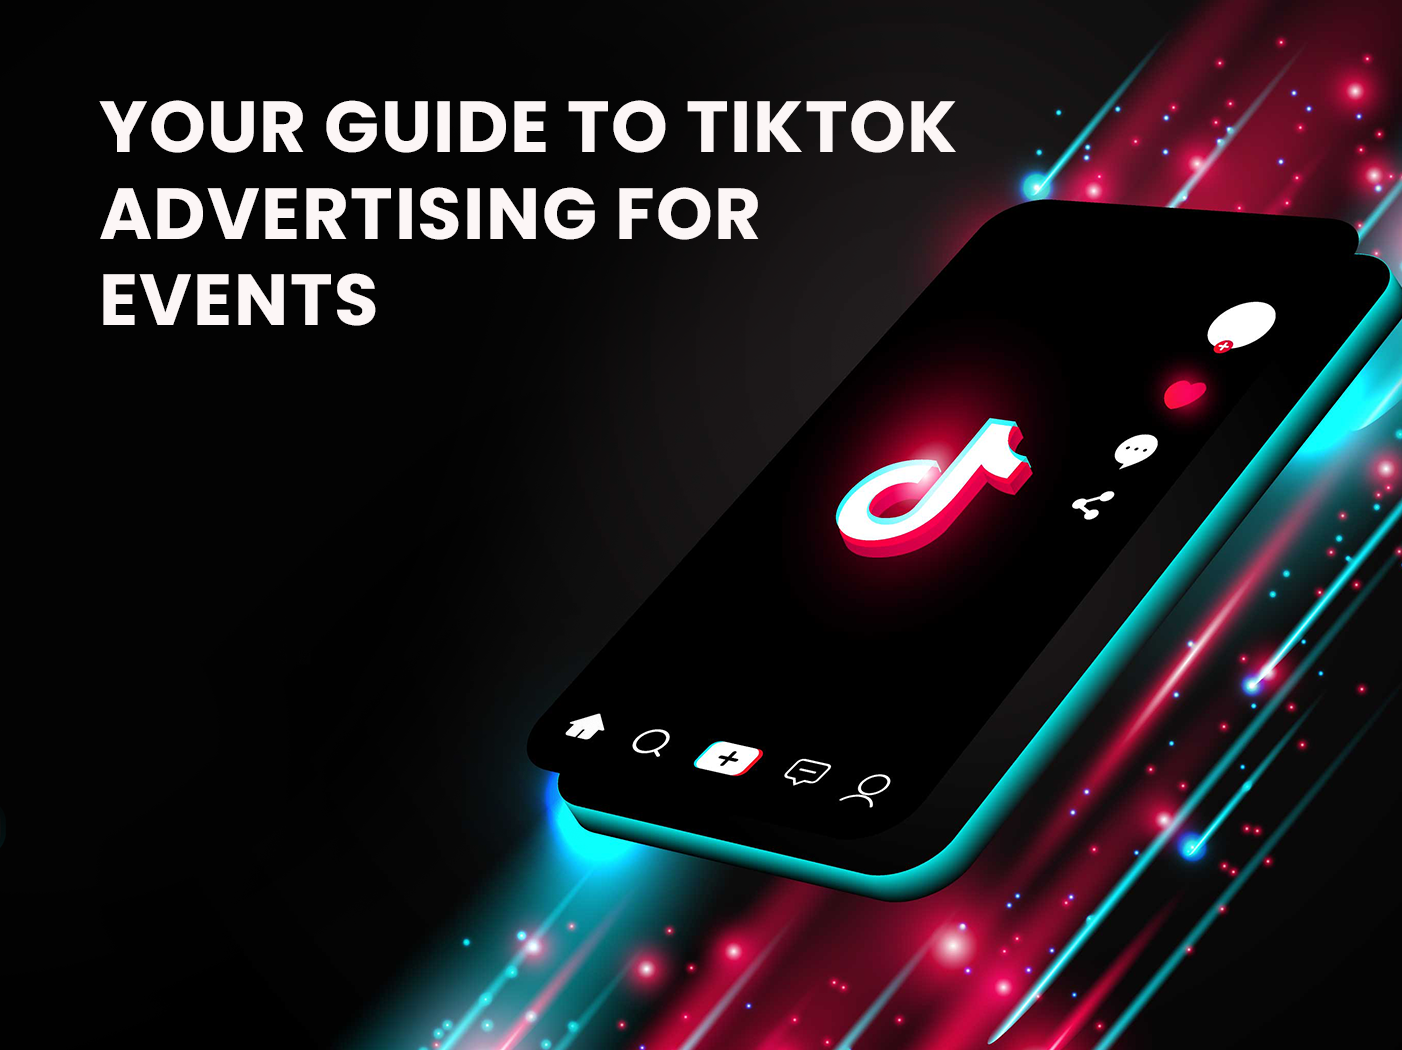 a black phone lying diagonally on a black background with blue and red glowing stripes and sparkles going from the bottom middle to the top right. On the phone is the TikTok logo and user interface. In the top left corner is the title “Your Guide To TikTok Advertising For Events” in bold white letters.